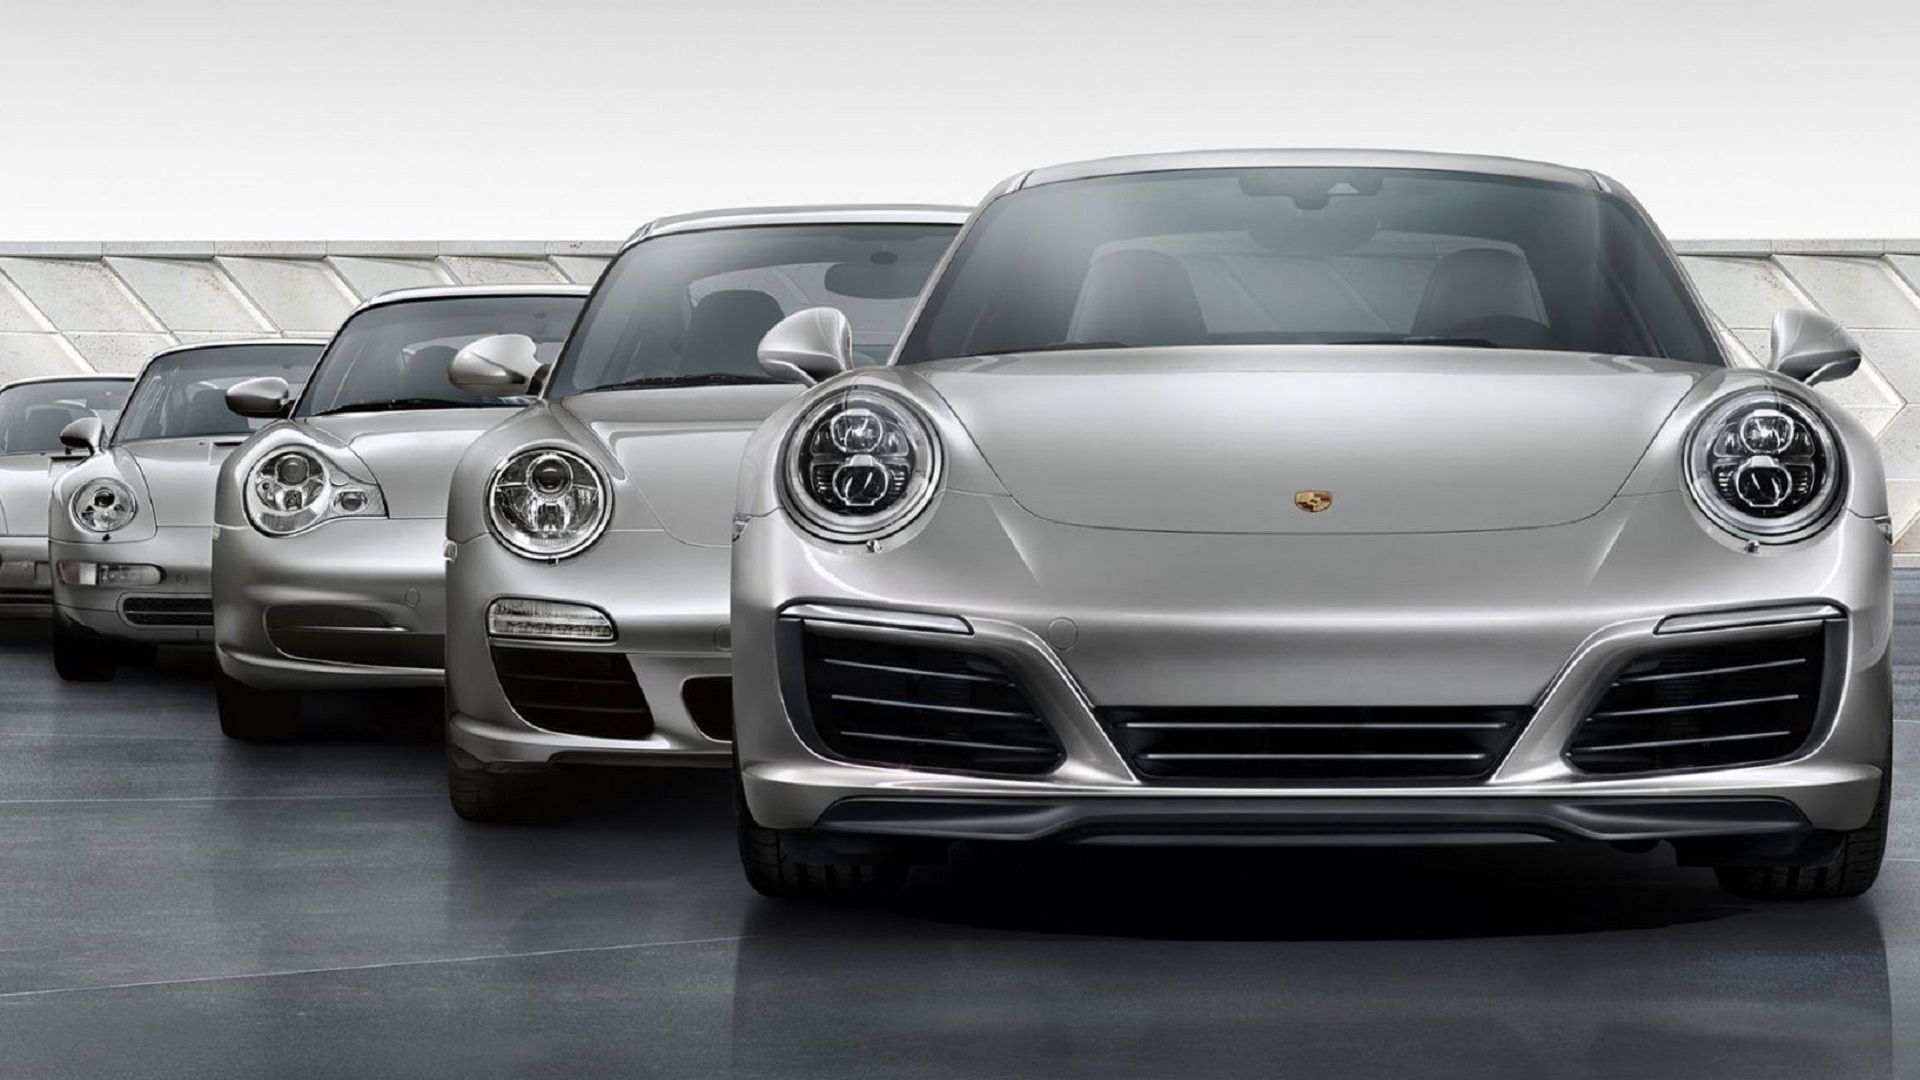 Refreshed Porsche 911 expected with 3.6-liter flat-six and the first hybrid  - Autoblog